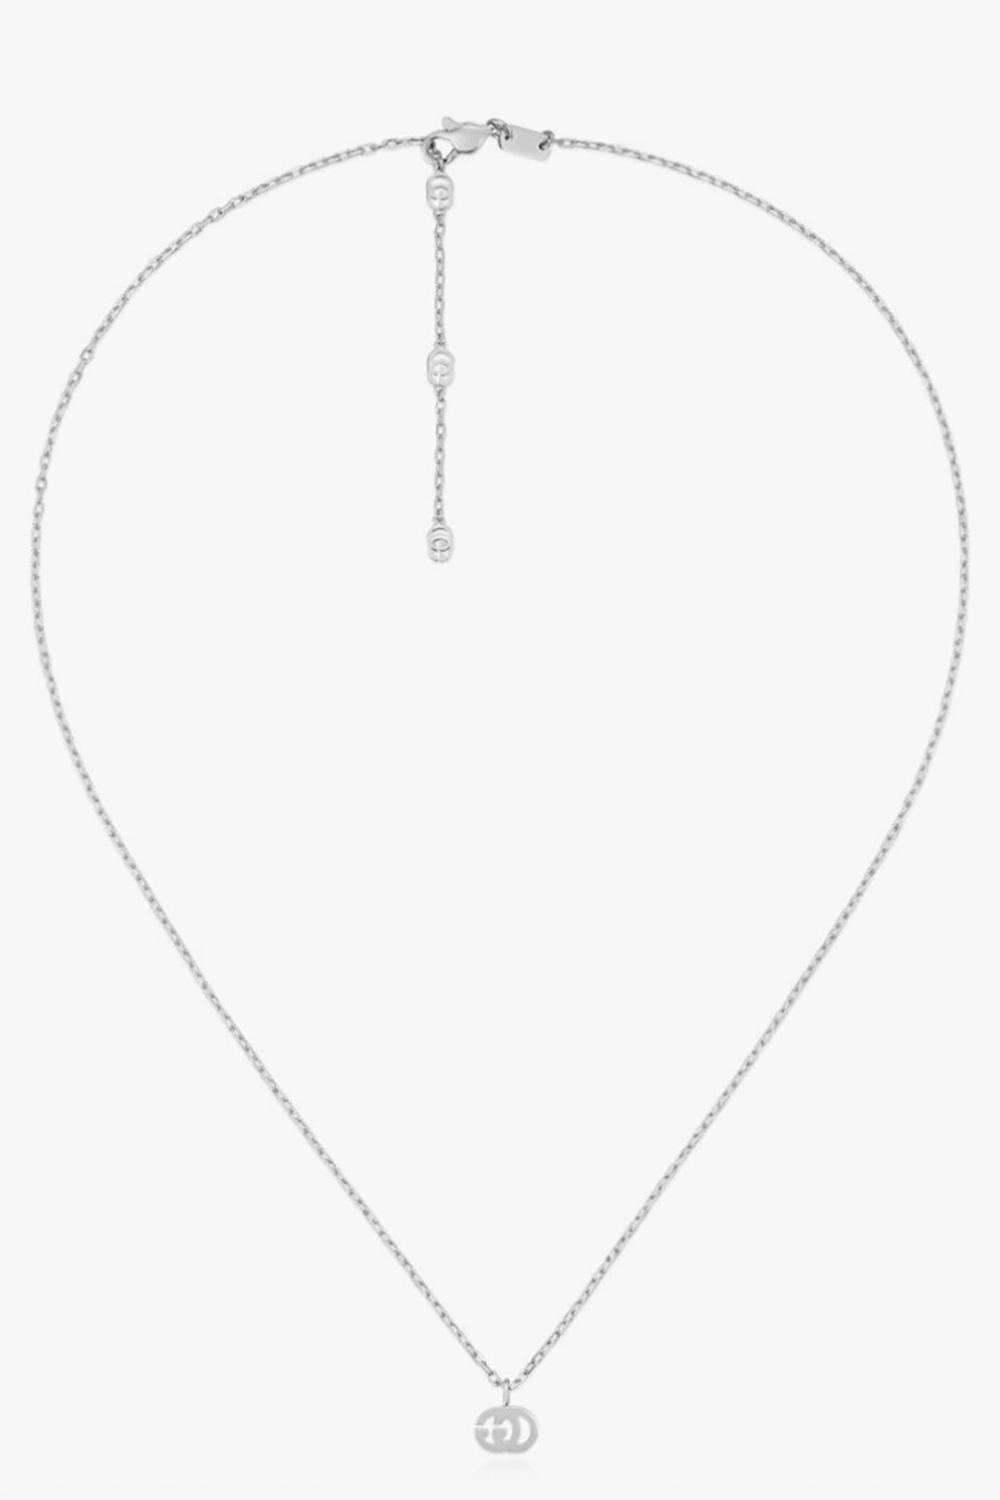 Gucci White gold necklace with diamonds